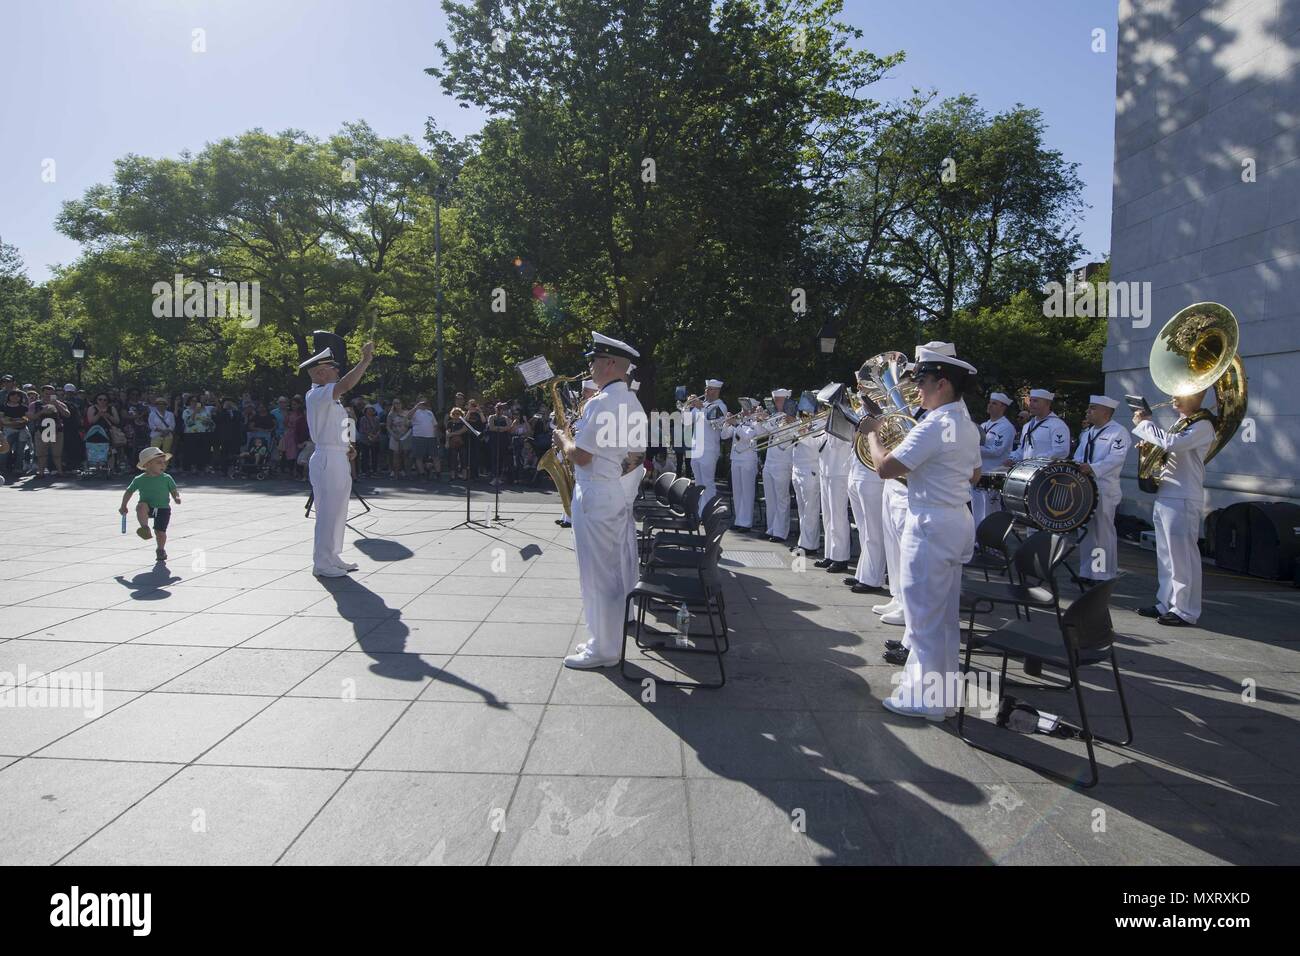 180524-N-BY095-0383 NEW YORK (May 24, 2018) Navy Band Northeast performs at Washington Square Park during Fleet Week New York (FWNY), May 24, 2018. Now in its 30th year FWNY is the city's time-honored celebration of the sea services. It is an unparalleled opportunity for the citizens of New York and the surrounding tri-state area to meet Sailors, Marines and Coast Guardsmen, as well as witness firsthand the latest capabilities of today's maritime services. (U.S. Navy photo by Mass Communication Specialist 3rd Class Maria I. Alvarez/Released). () Stock Photo